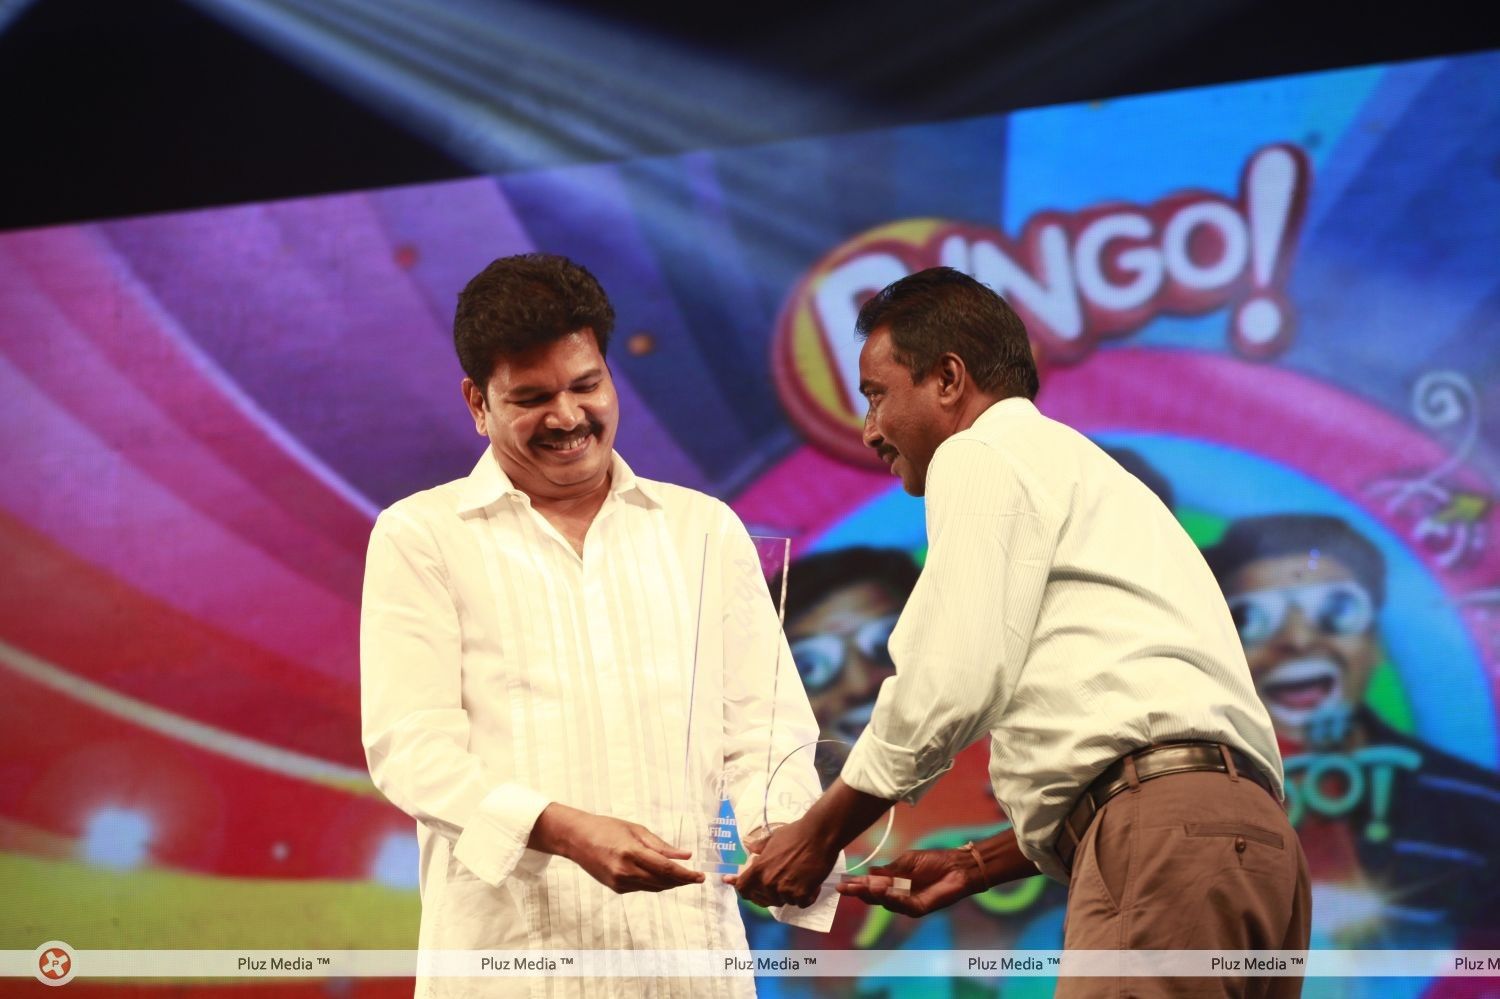 Nanban 100th Day Function - Pictures | Picture 191232